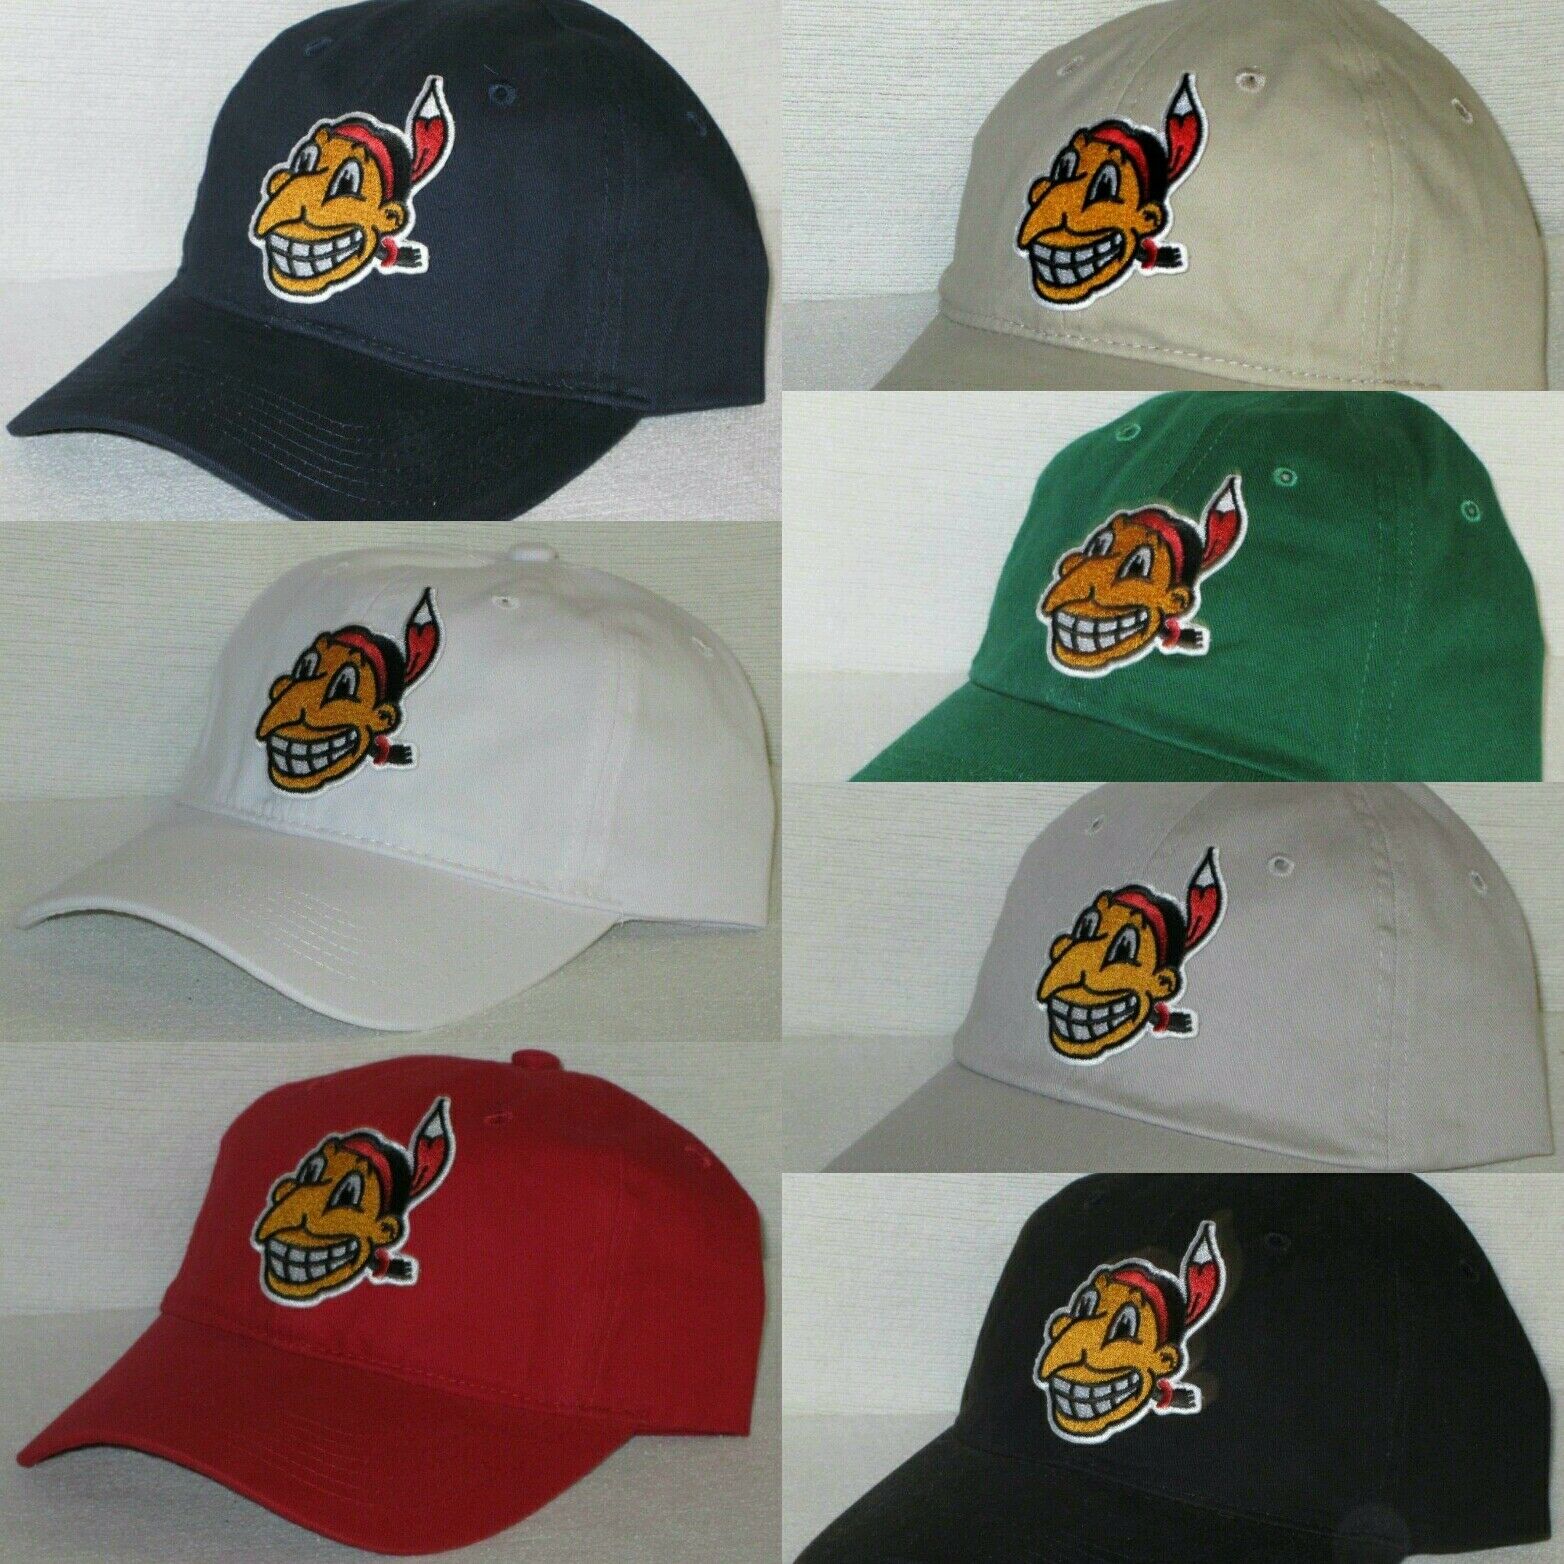 Cleveland Indians Polo Style Cap ⚾hat ⚾vintage Mlb Patch/logo ⚾7 Hot Colors ⚾new